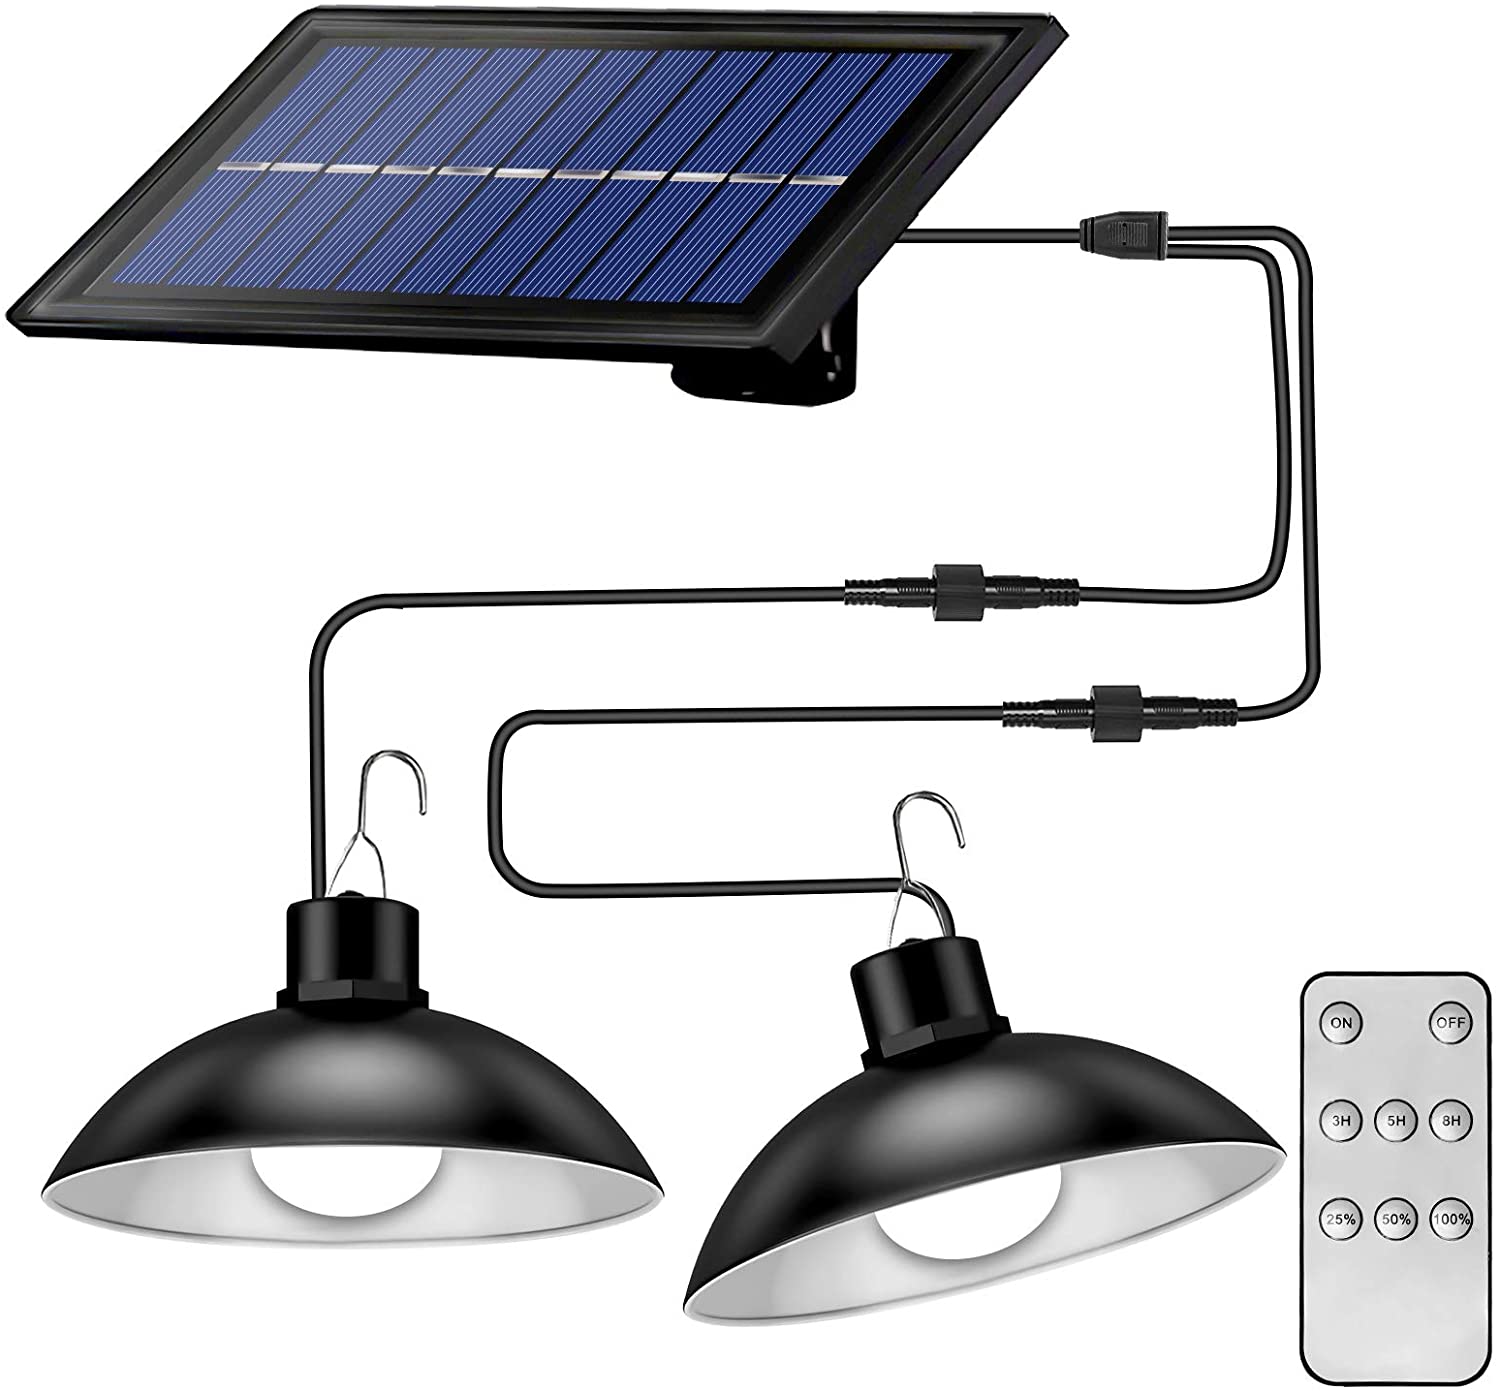 Top 5 Solar Shed Lights in 2022